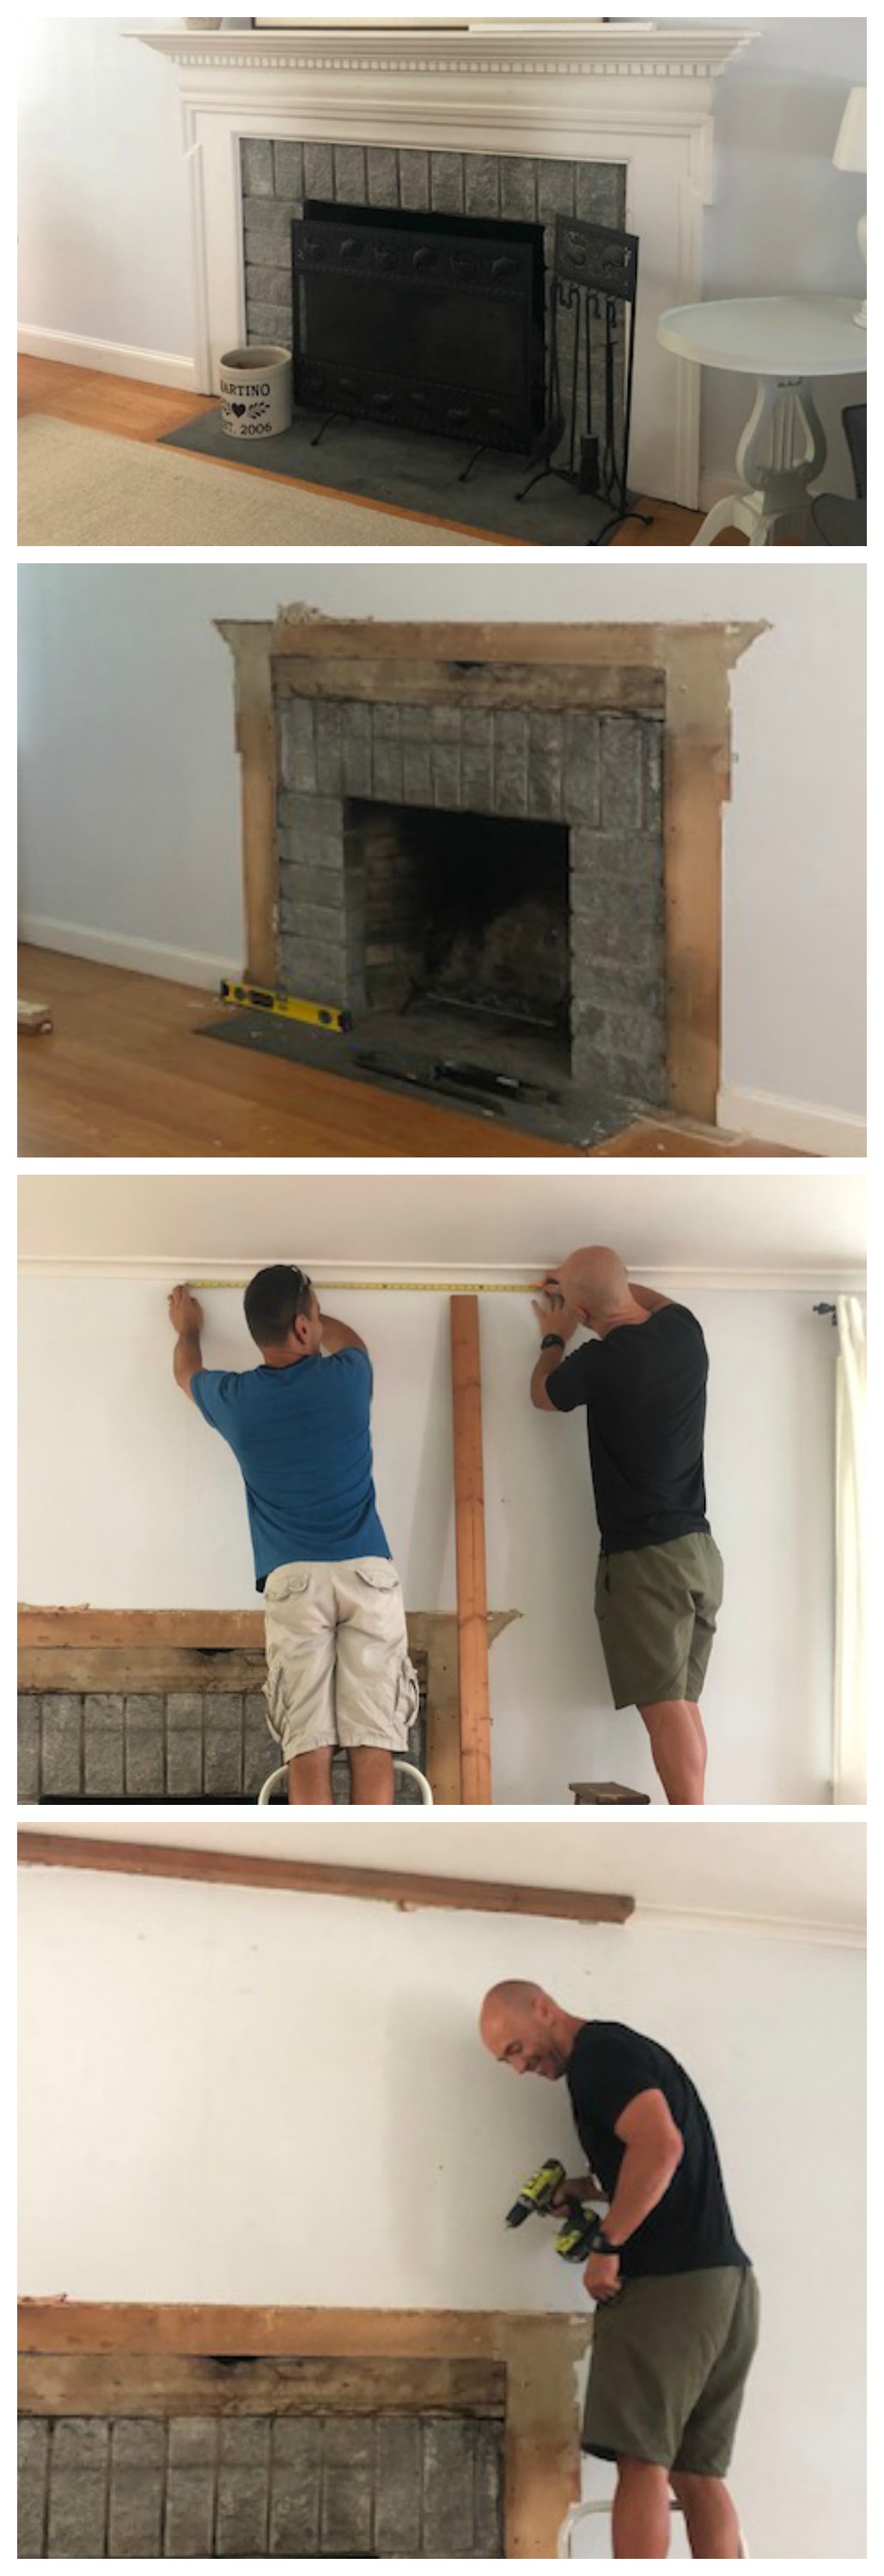 Live Edge Fireplace Mantel Fresh Shiplap Fireplace and Diy Mantle Ditched the Old